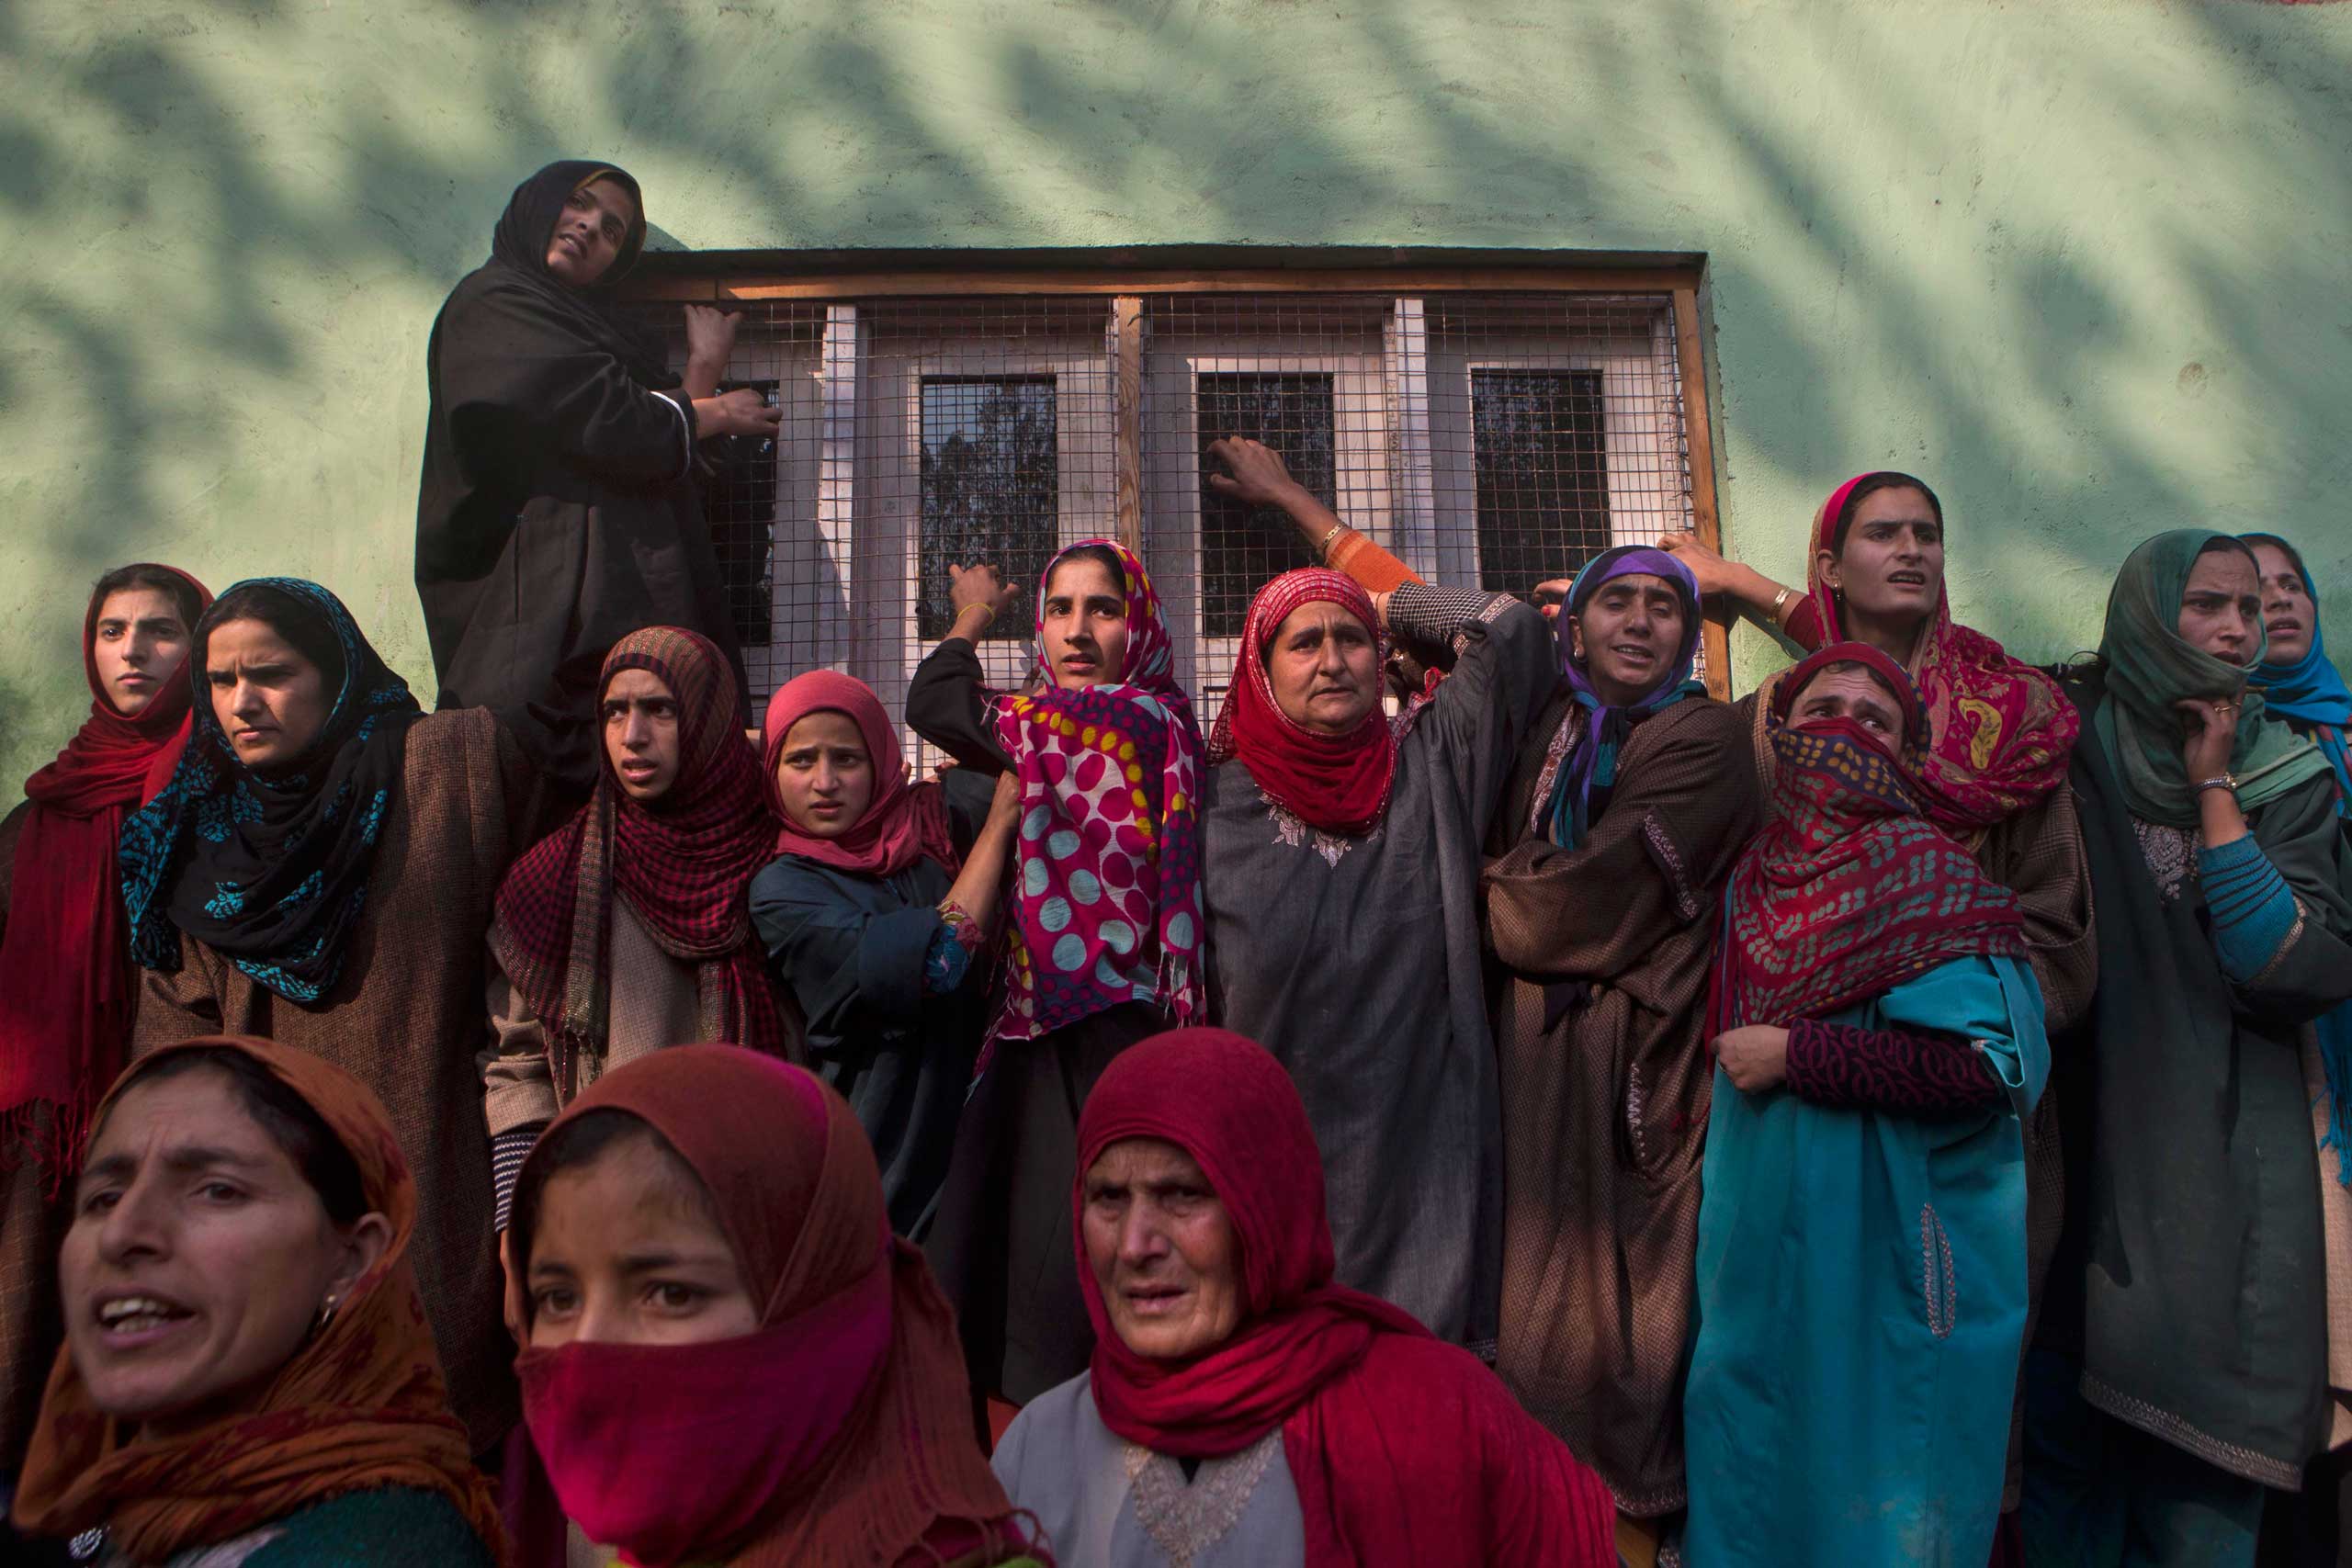 Nov. 14, 2014. Kashmiri villagers watch the funeral procession of Mohammad Abas Malla, a suspected rebel, at Nowpora village, south of Srinagar, India. Two suspected rebels and a civilian were killed in a fierce gunbattle in the Indian-controlled portion of Kashmir, an Indian security official said Friday.